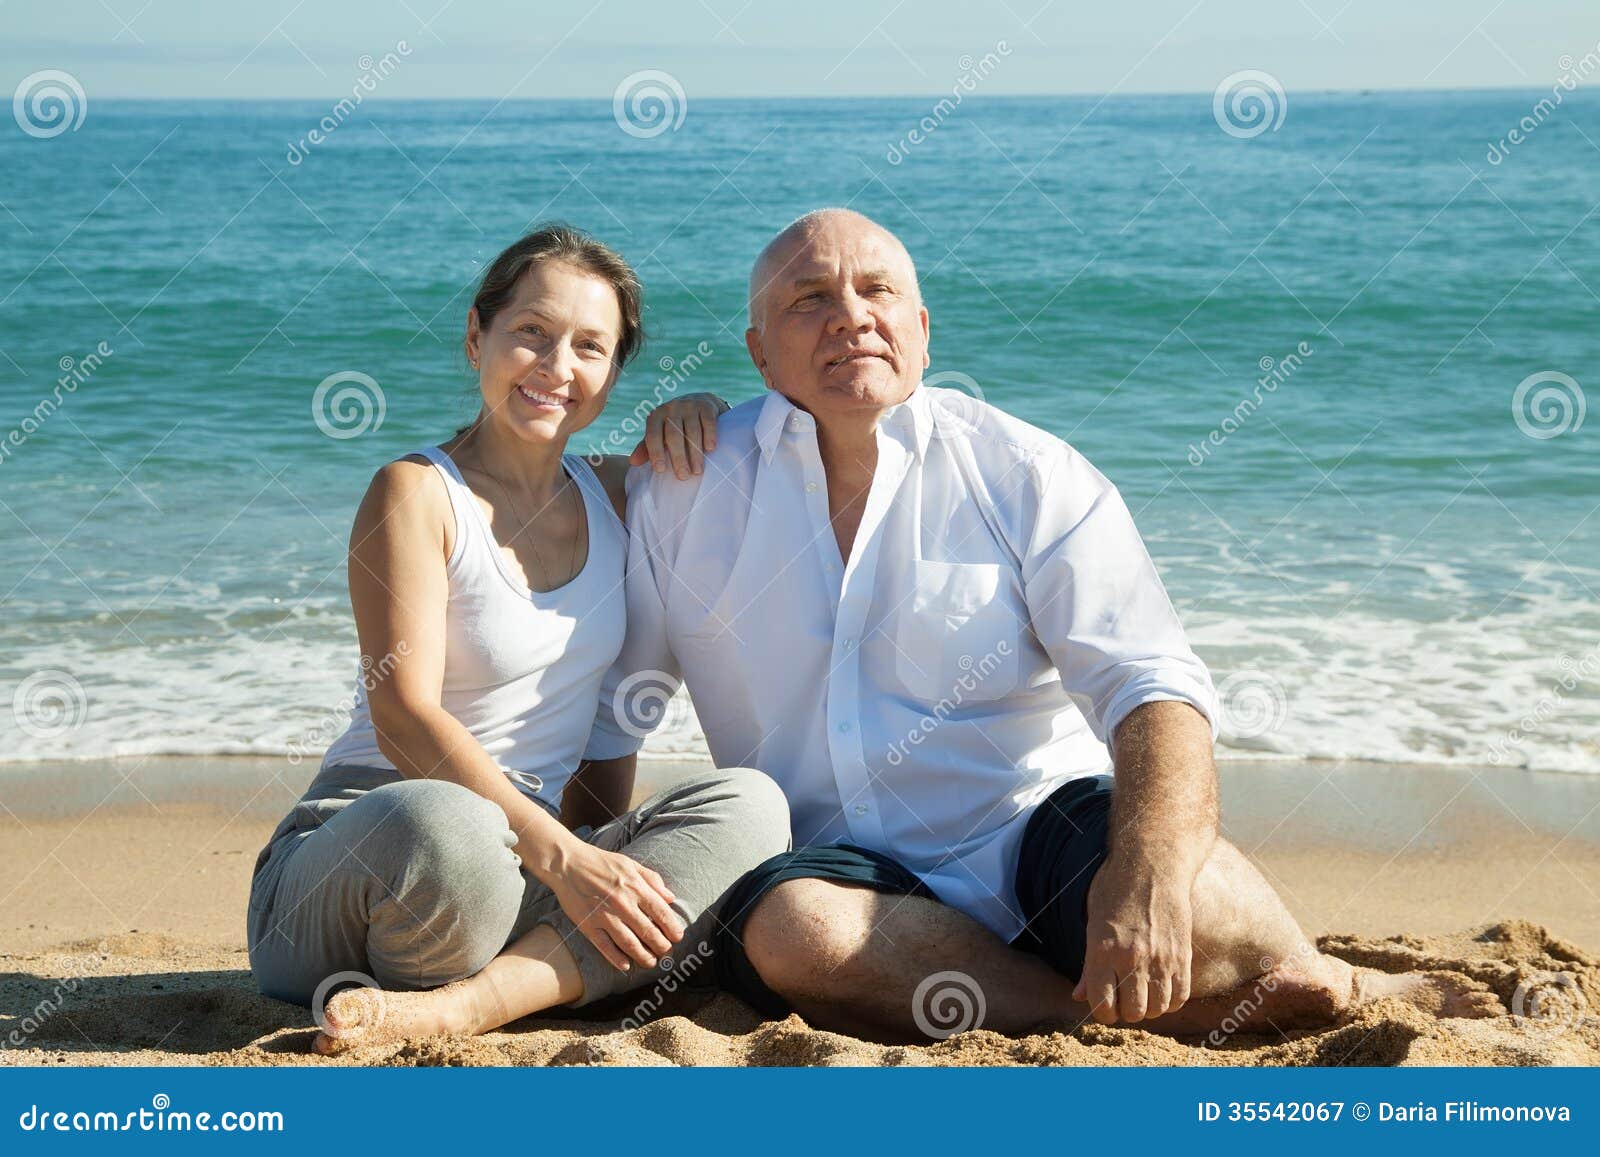 Mature Couple At Sea Vacation Stock Image Image of